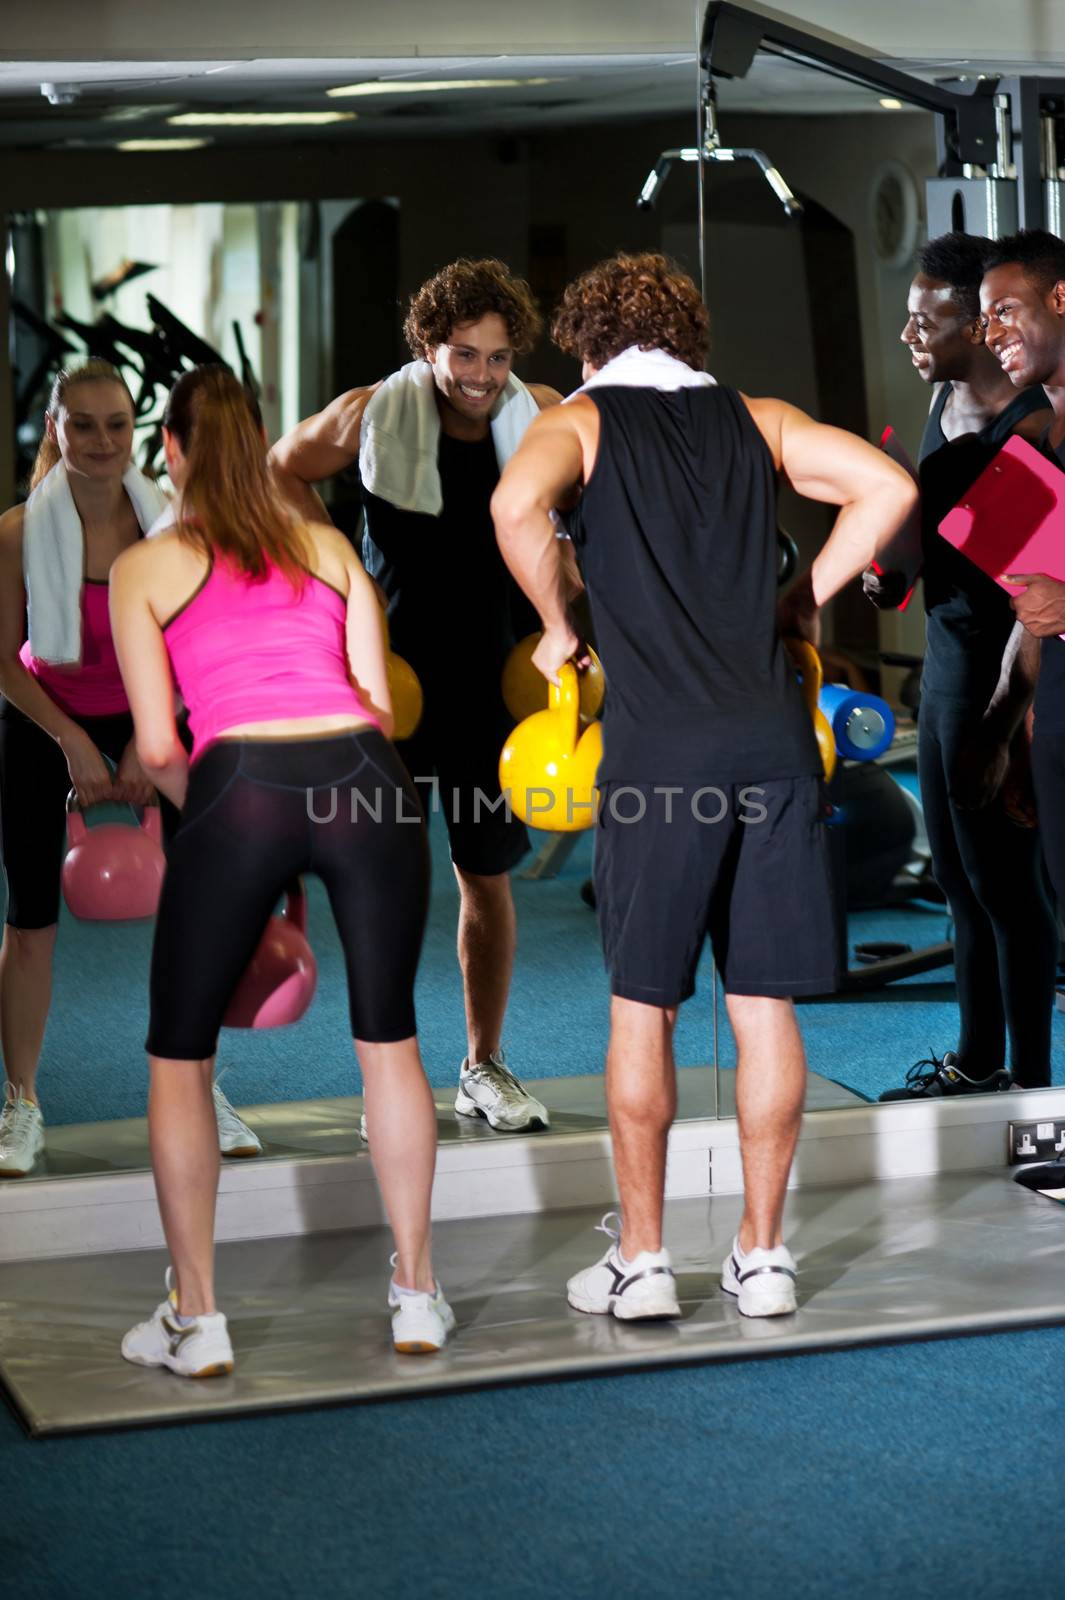 Fitness trainer giving out instructions to people by stockyimages